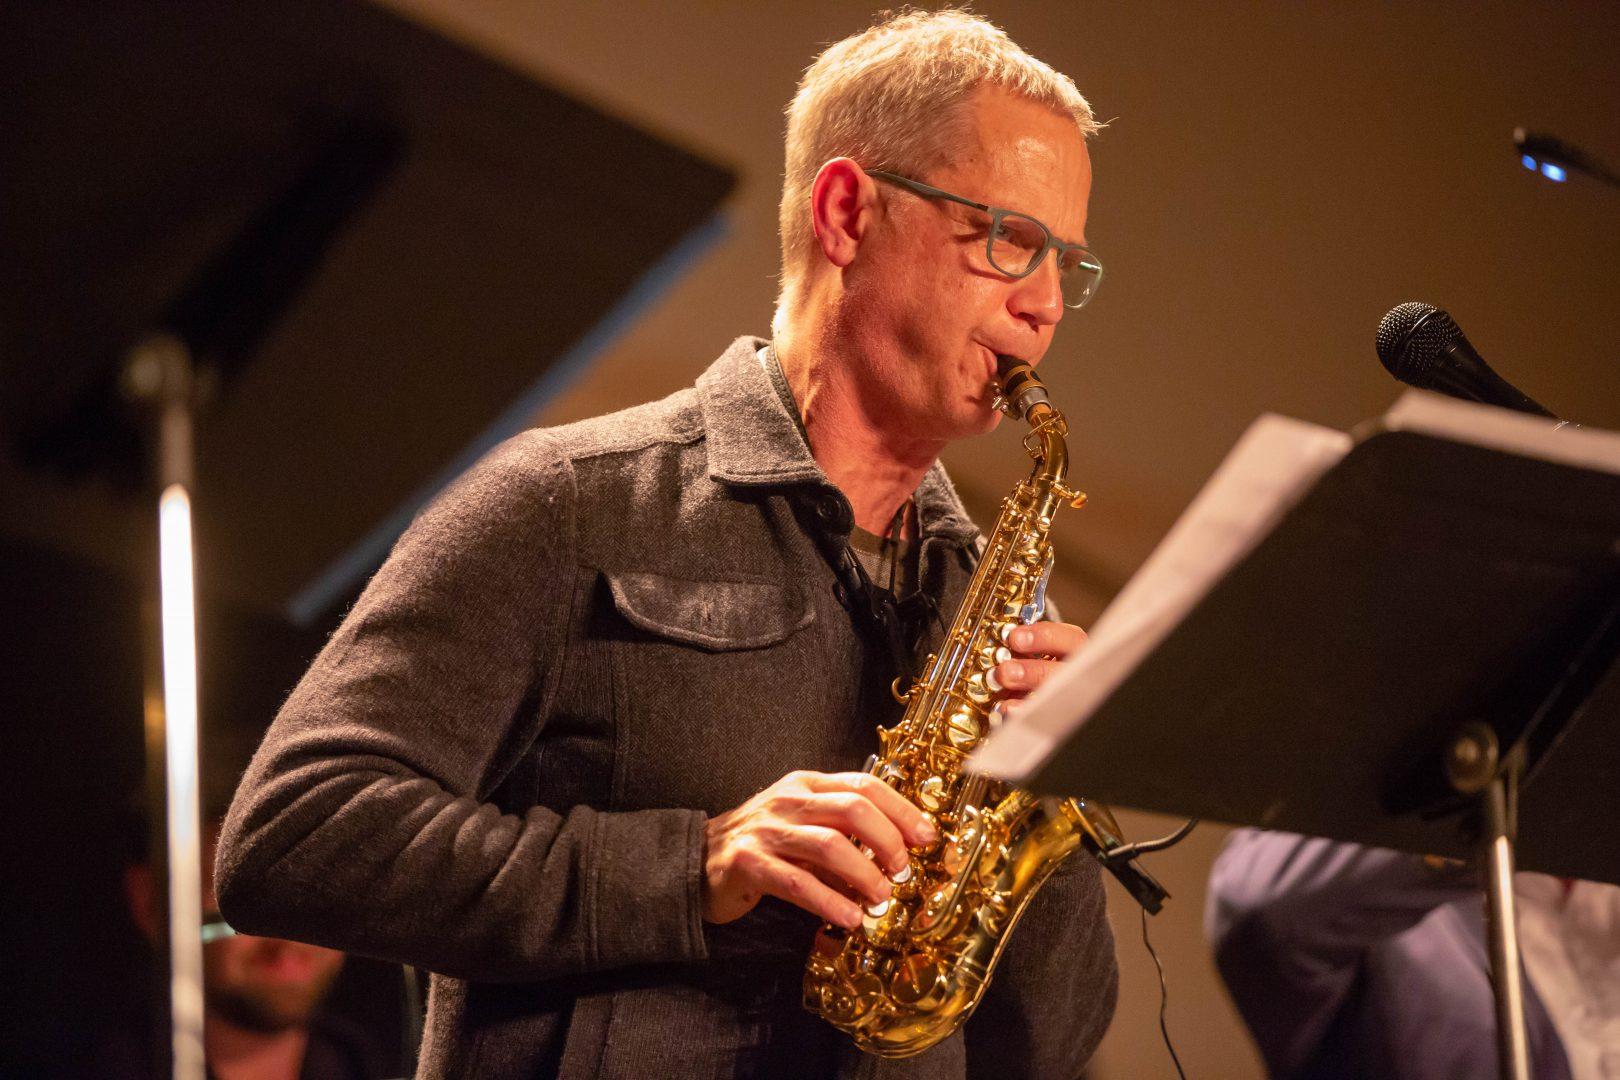 Saxophonist Benjamin Boone performs in front of a sold out crowd at the California Arts Academy on Friday Feb. 1st, 2019. (Jose Romo Jr./The Collegian)